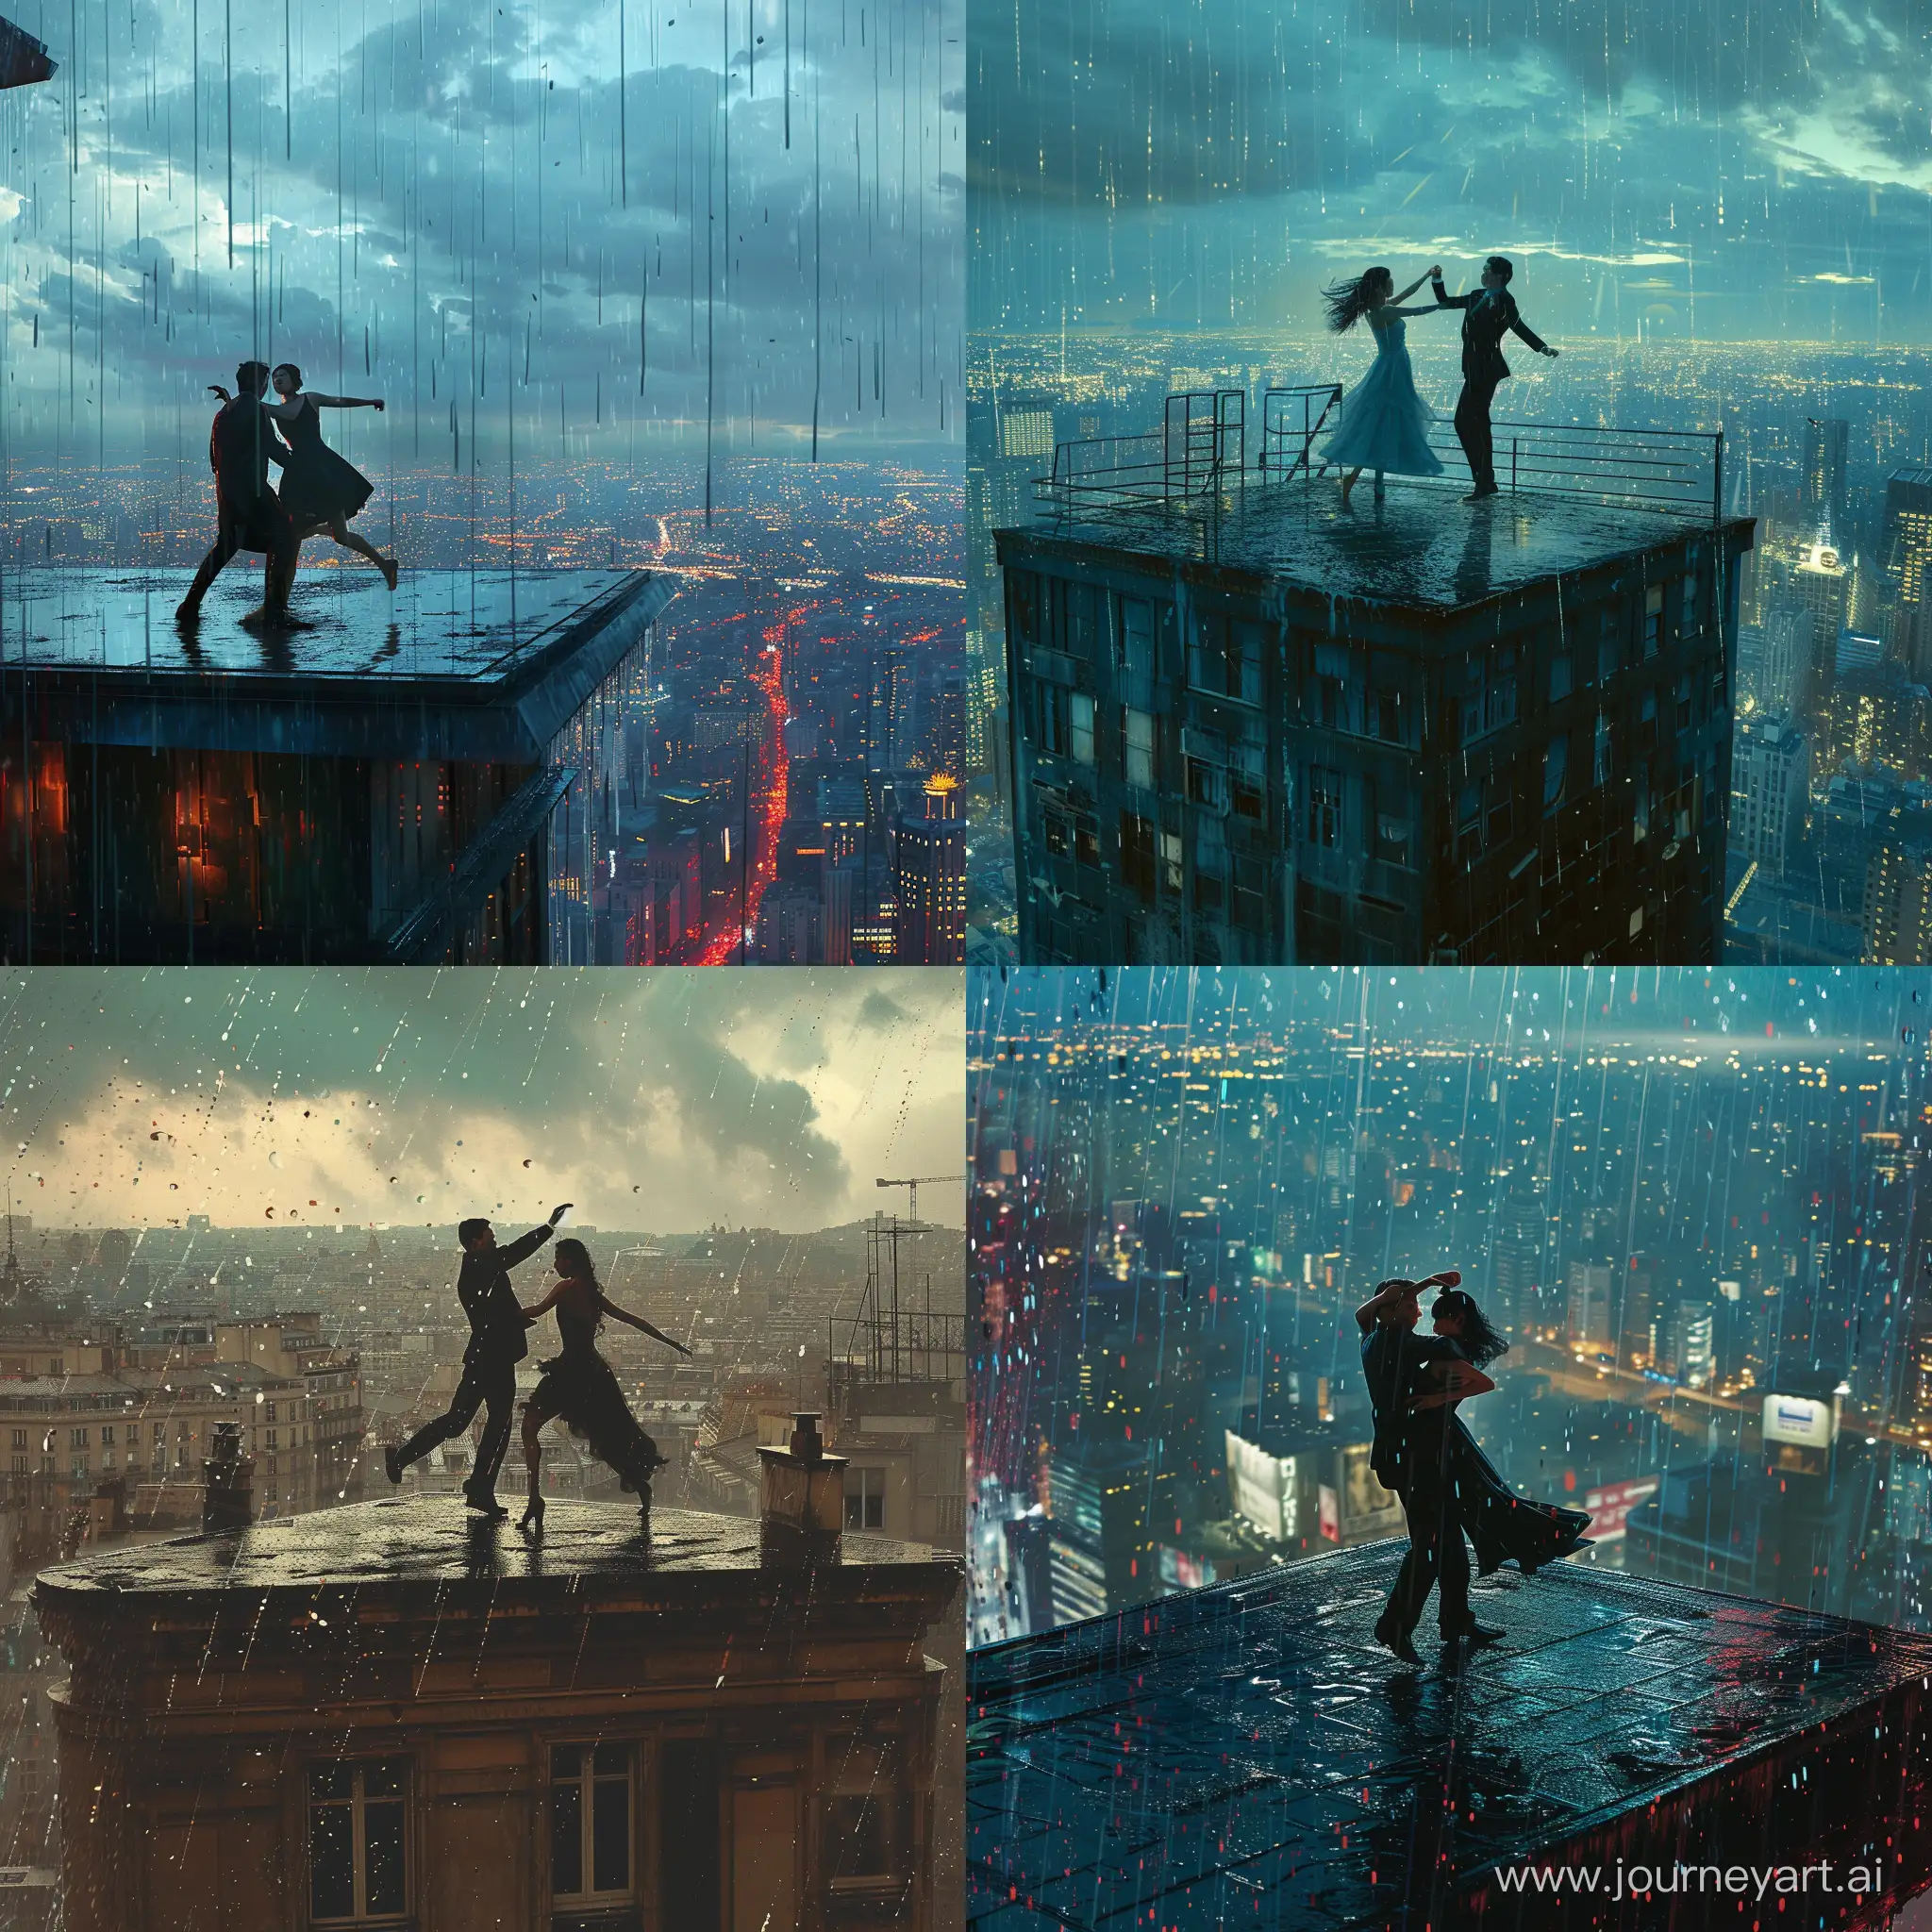 A beautiful cinematic image of a romantic dance scene on top of a building. The man is dancing with his In the chaotic realm of a malfunctioning and unpredictable Al, emerges a portrait of an unexpectedly beautiful woman, The creation of a Broken Al adds an element of unpredictability and uniqueness to the portrayal, resulting in a blend of technological chaos and unexpected beauty, by yukisakura, awesome full color rain-soaked environment with a cinematic city backdrop.